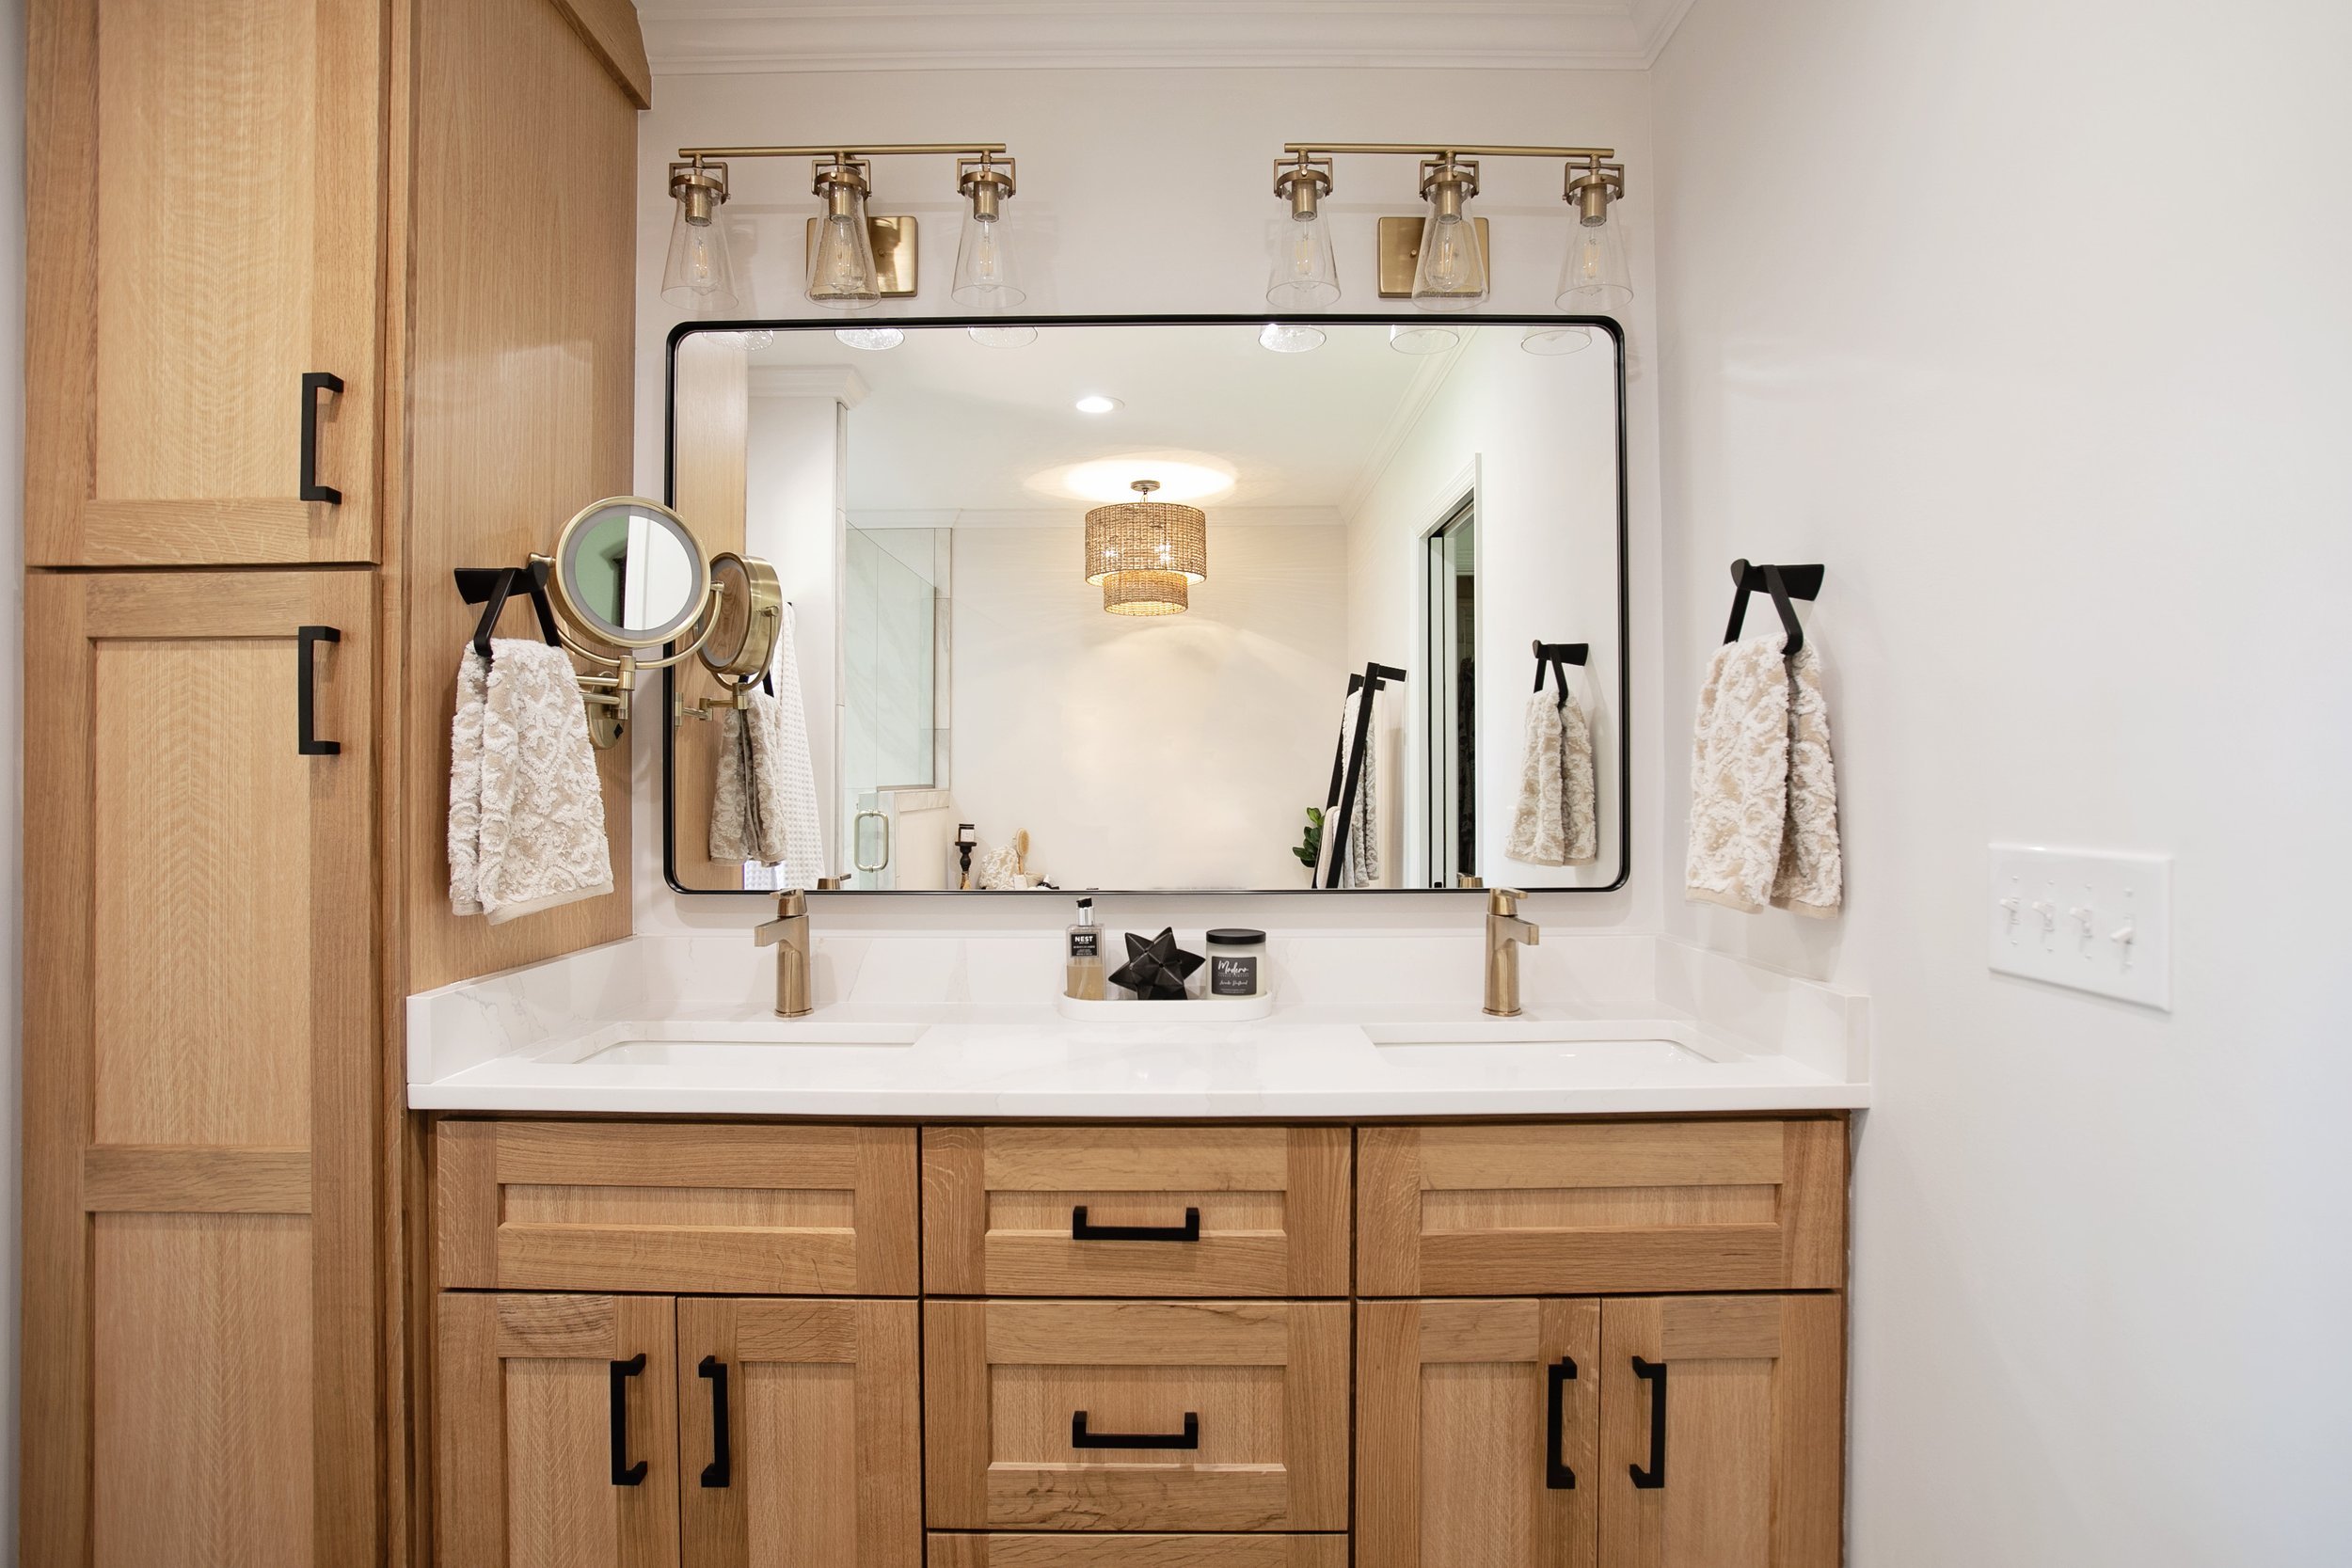 Large Format Luxury Primary Bath Cabinetry